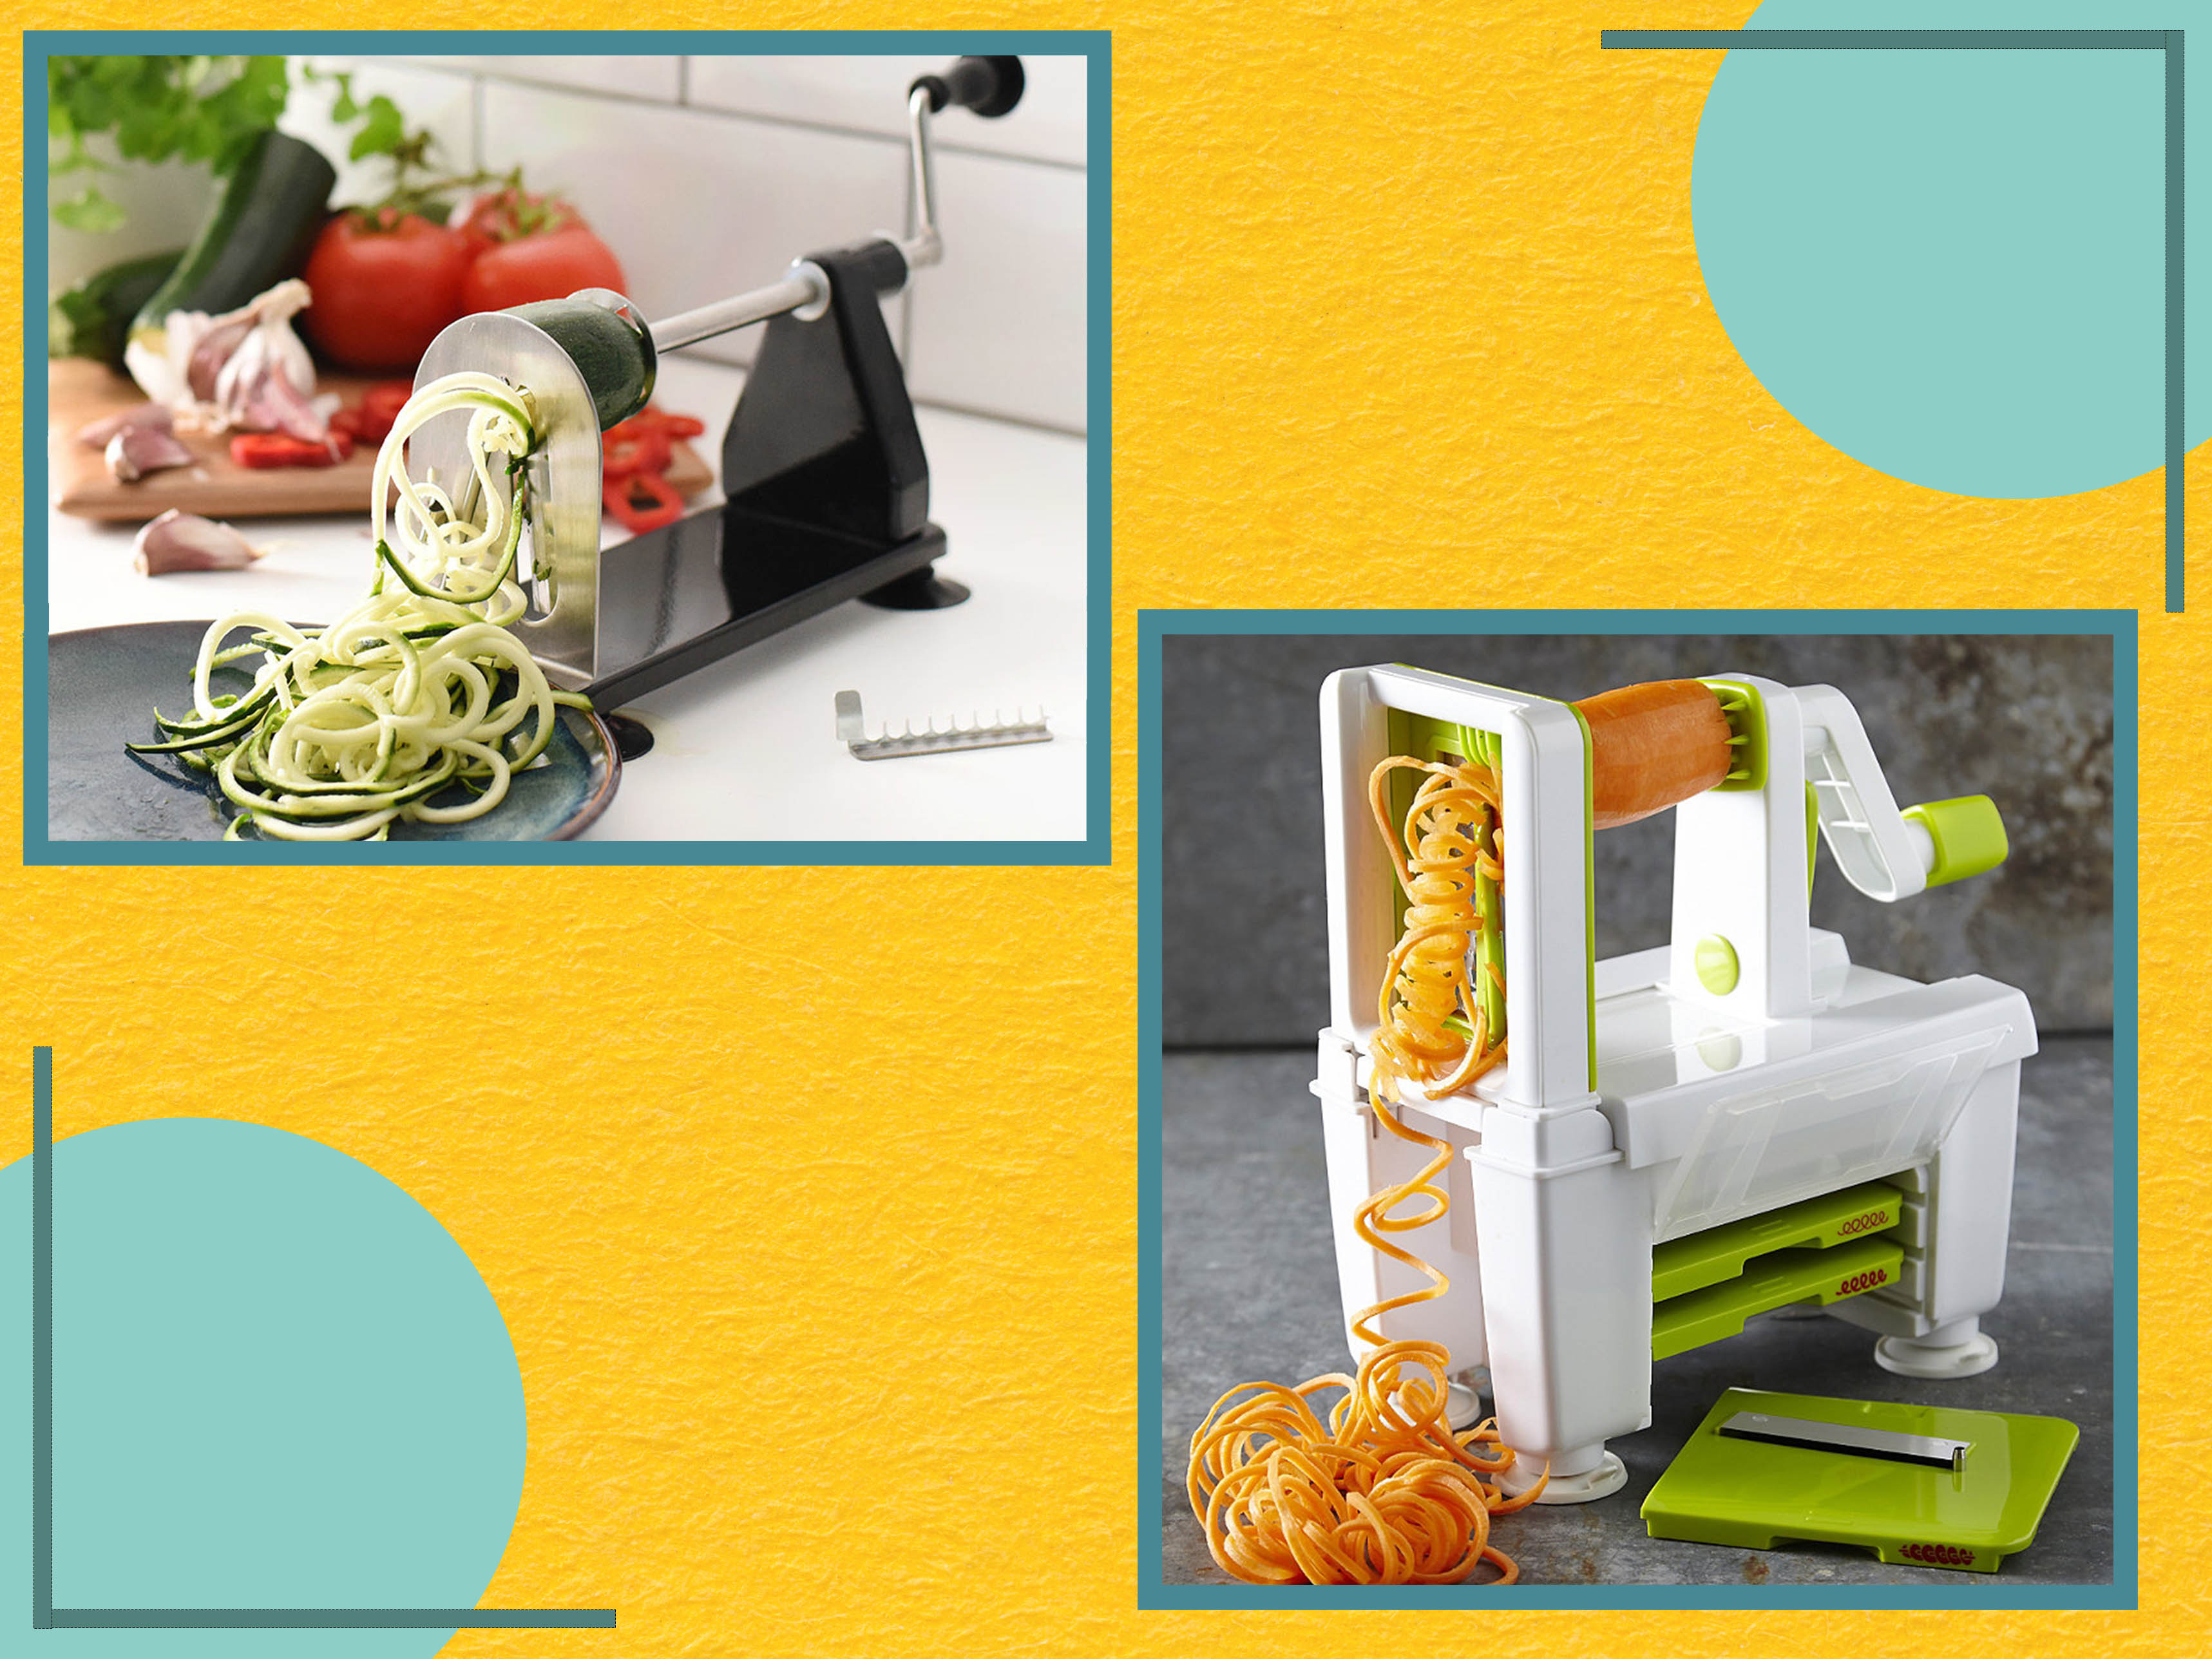 A veggie spiralizer with the best reviews on